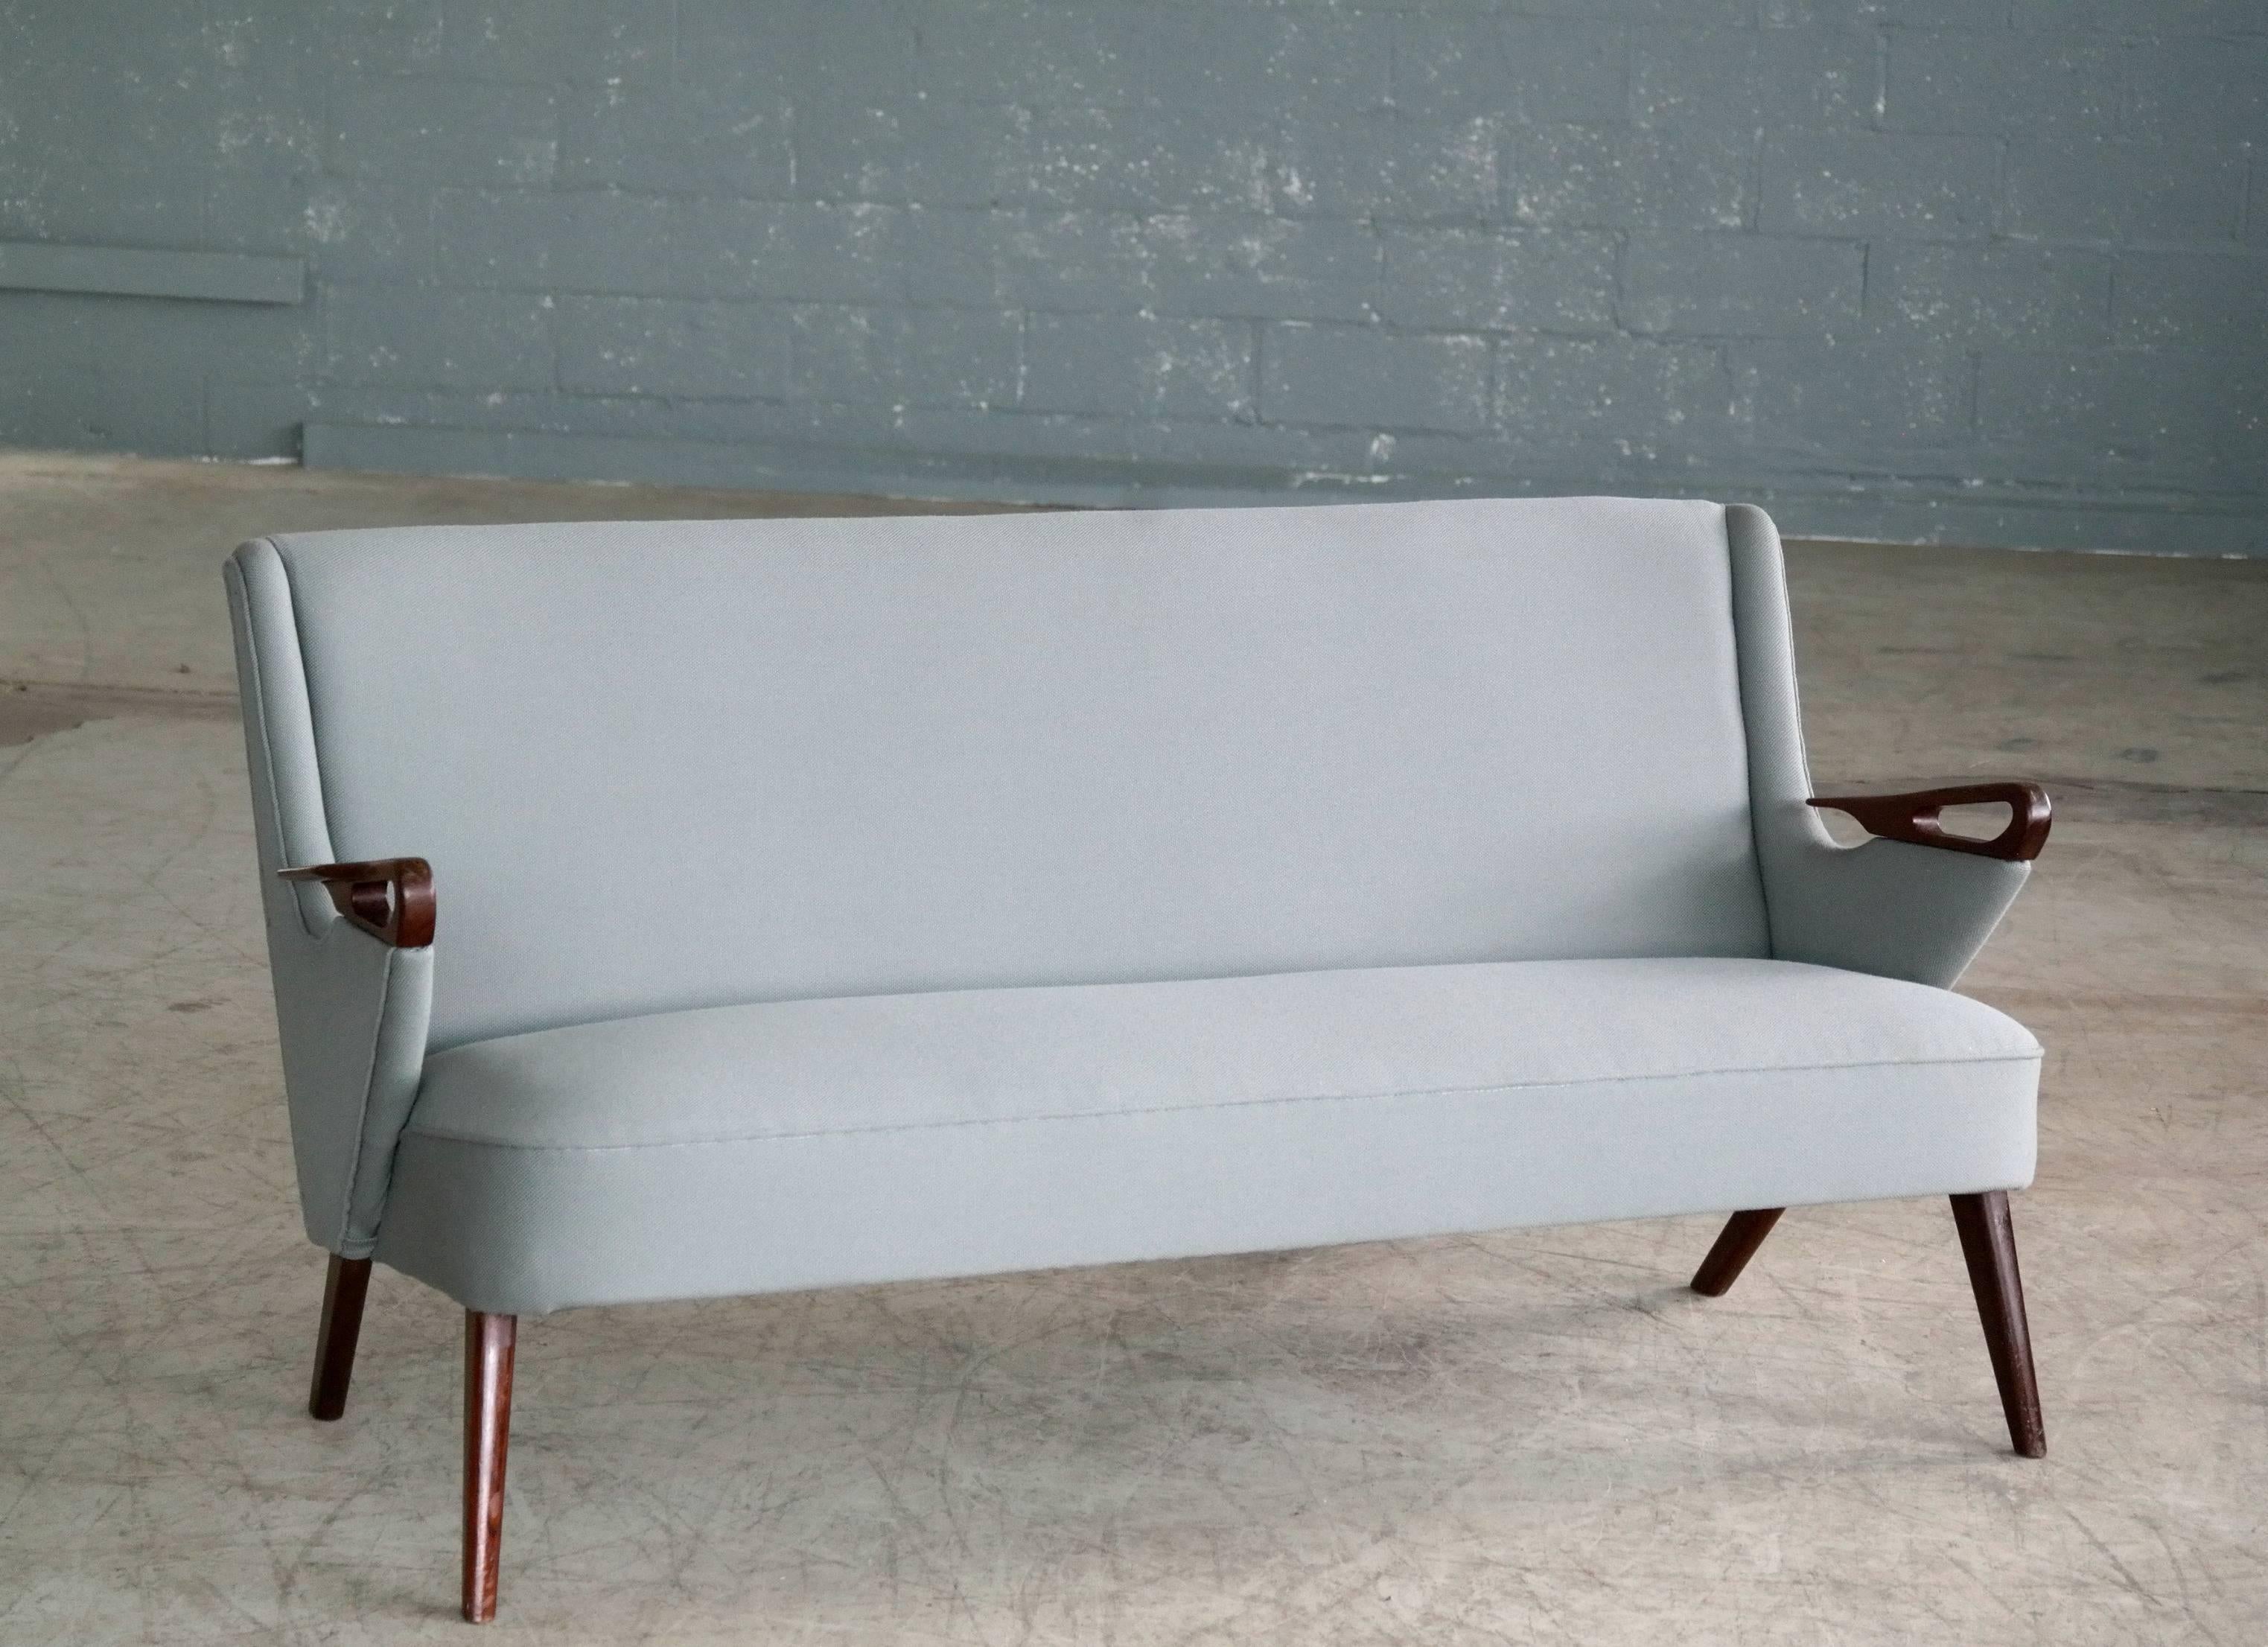 Very rare and simply stunning 1950s sofa designed in the early 1950s by Chresten Findahl Brodersen and manufactured by Findahl Møbelfabrik. While stunning examples of this design have been see infrequently in the Danish furniture market it was only